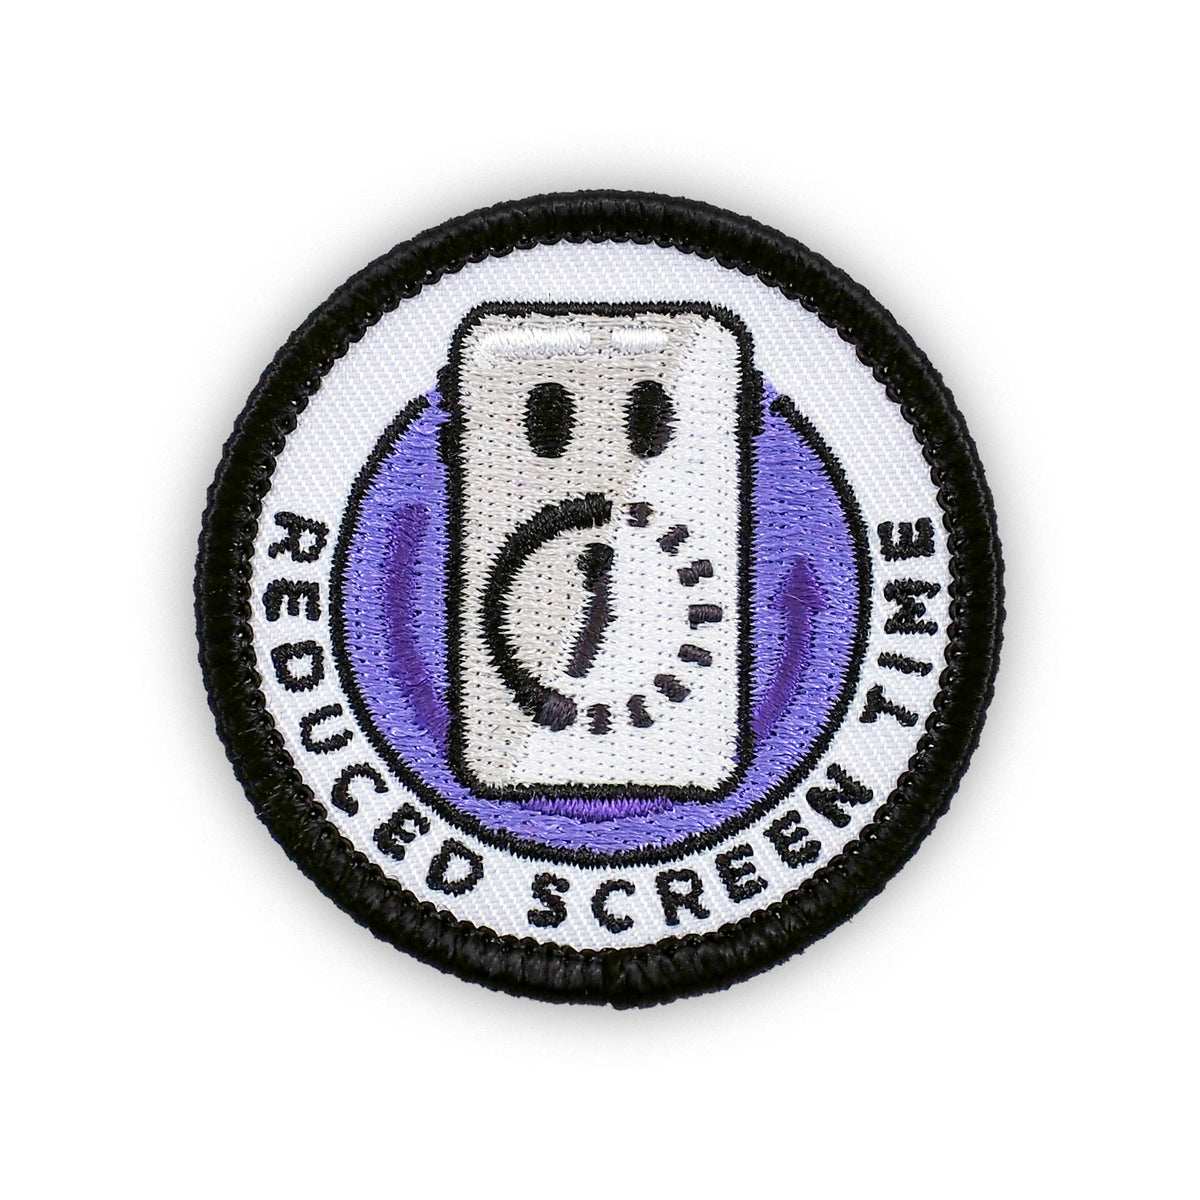 Reduced Screen Time adulting merit badge patch for adults